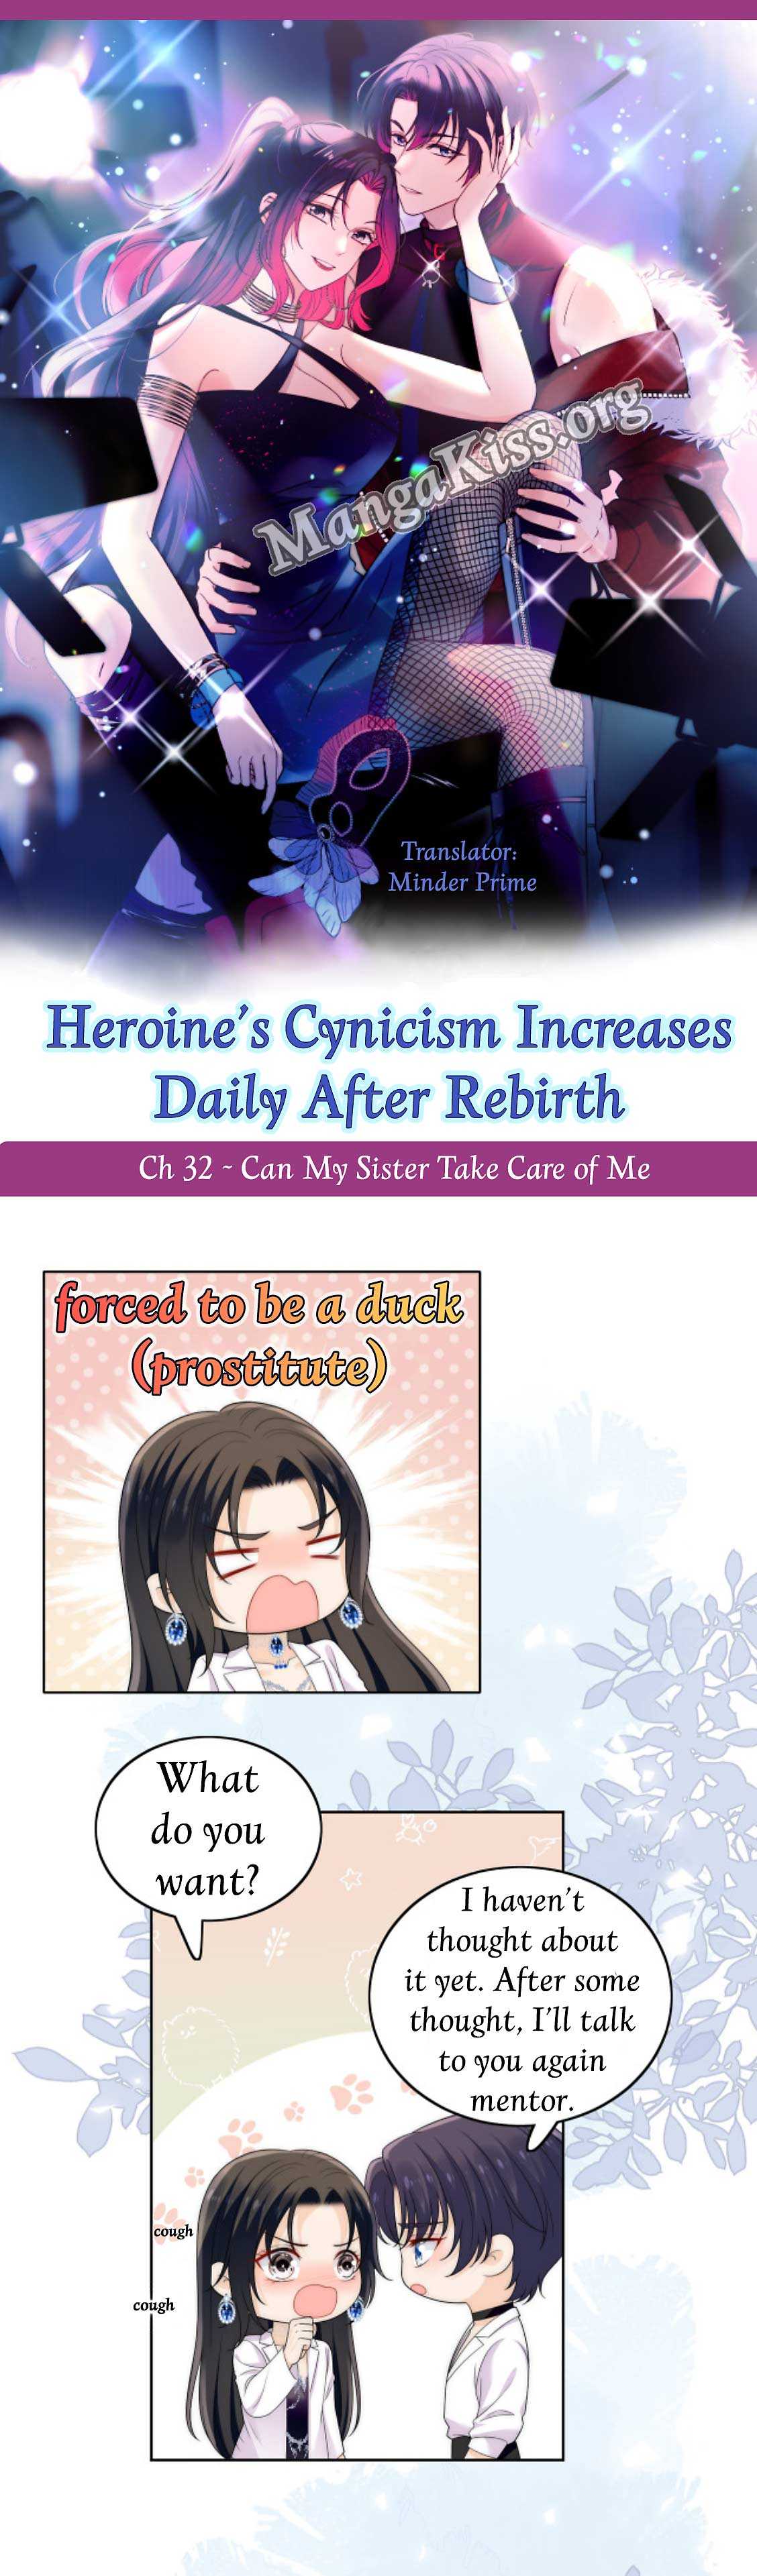 Heroine’S Cynicism Increases Daily After Rebirth - Page 3